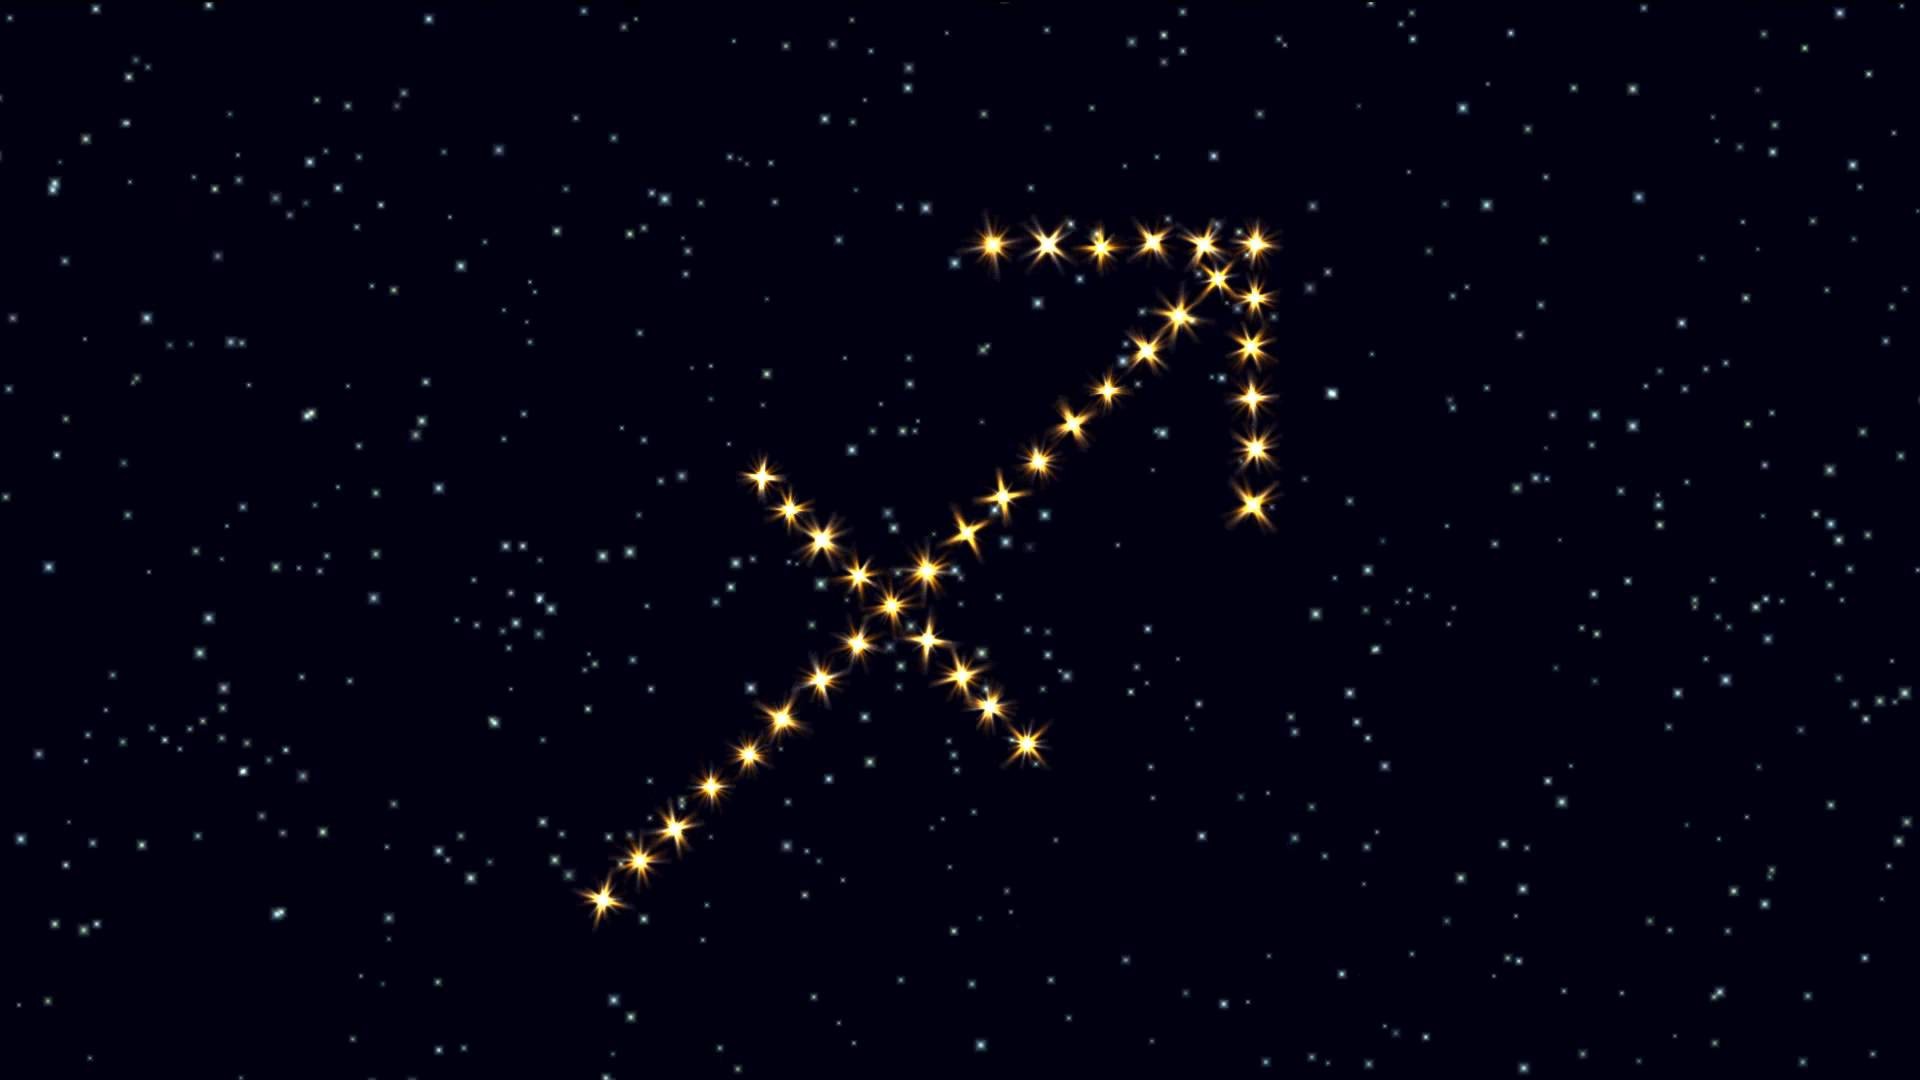 1920x1080 Star sign Sagittarius wallpapers and images - wallpapers, pictures, photos